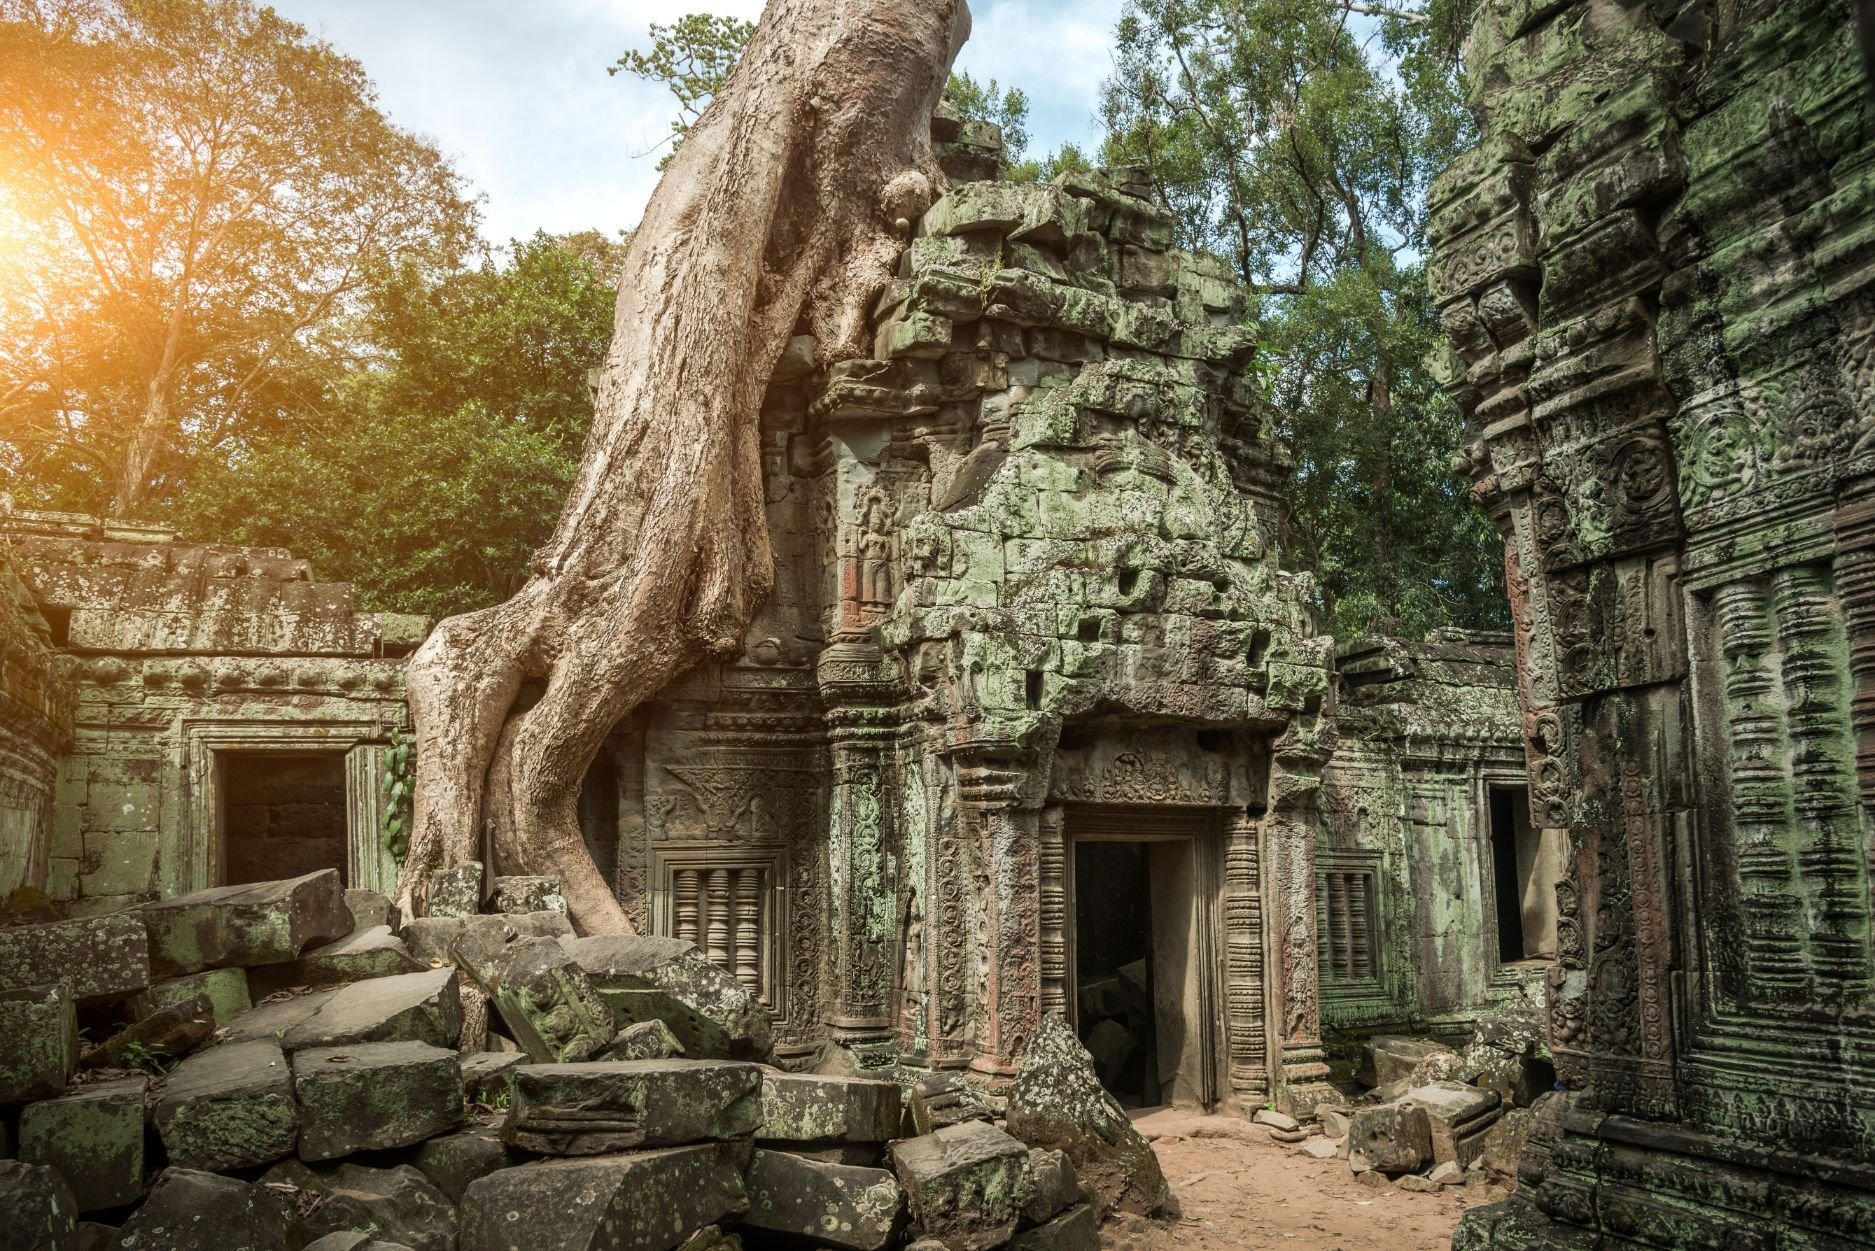 A tree wraps around one of the temples of Angkor, reclaiming the temple for the jungle.